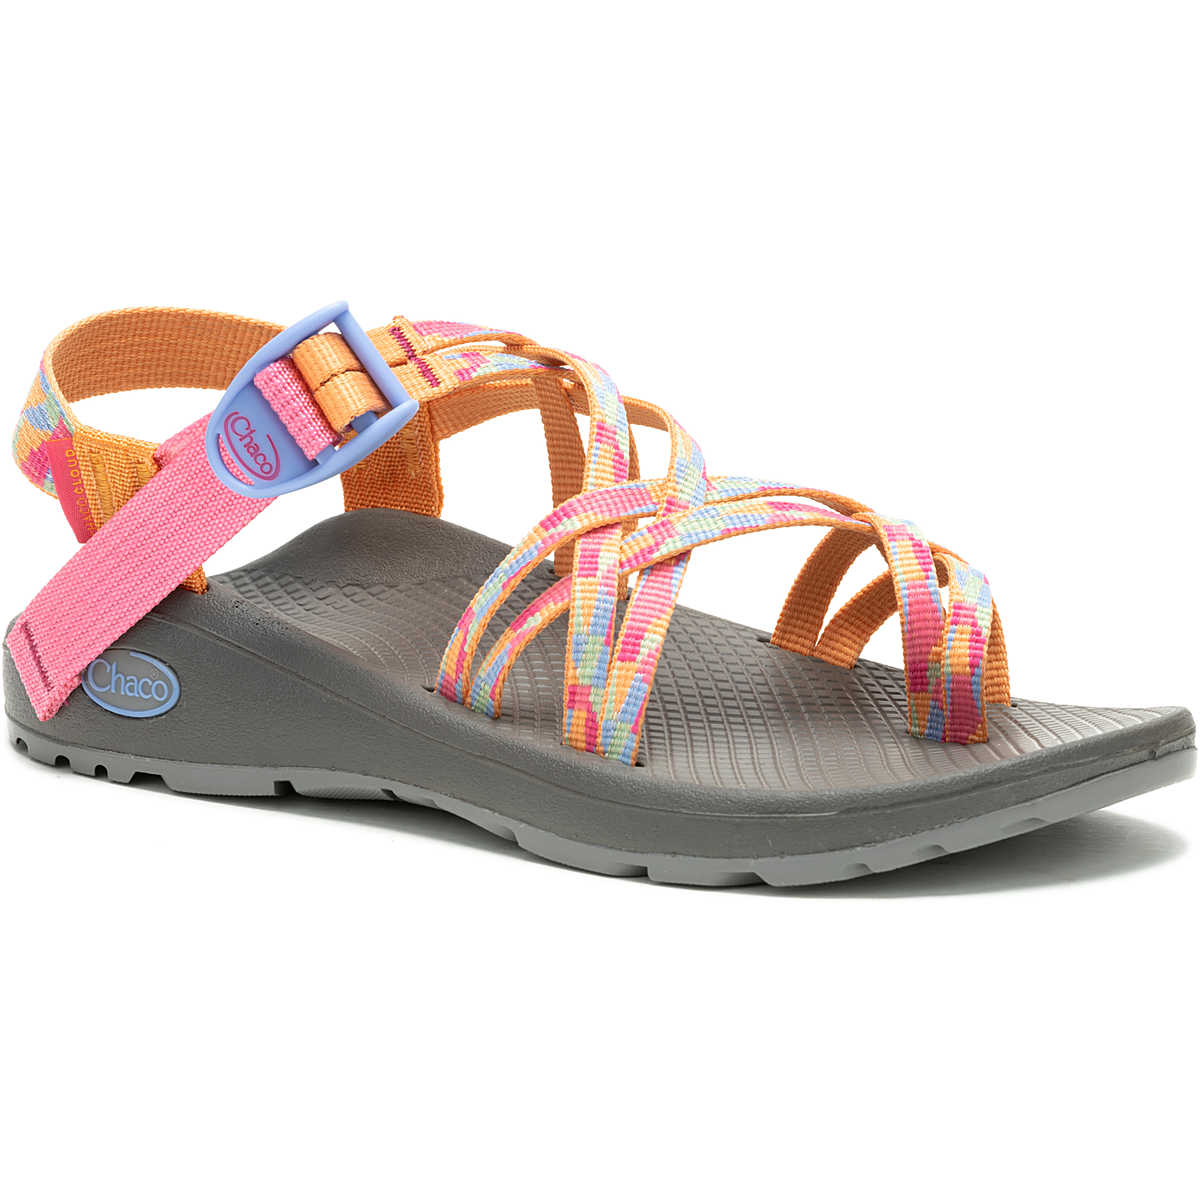 Chaco, ZX/2 Cloud Dual-Strap Cushioned Sandal, Women's. Candy Sorbet